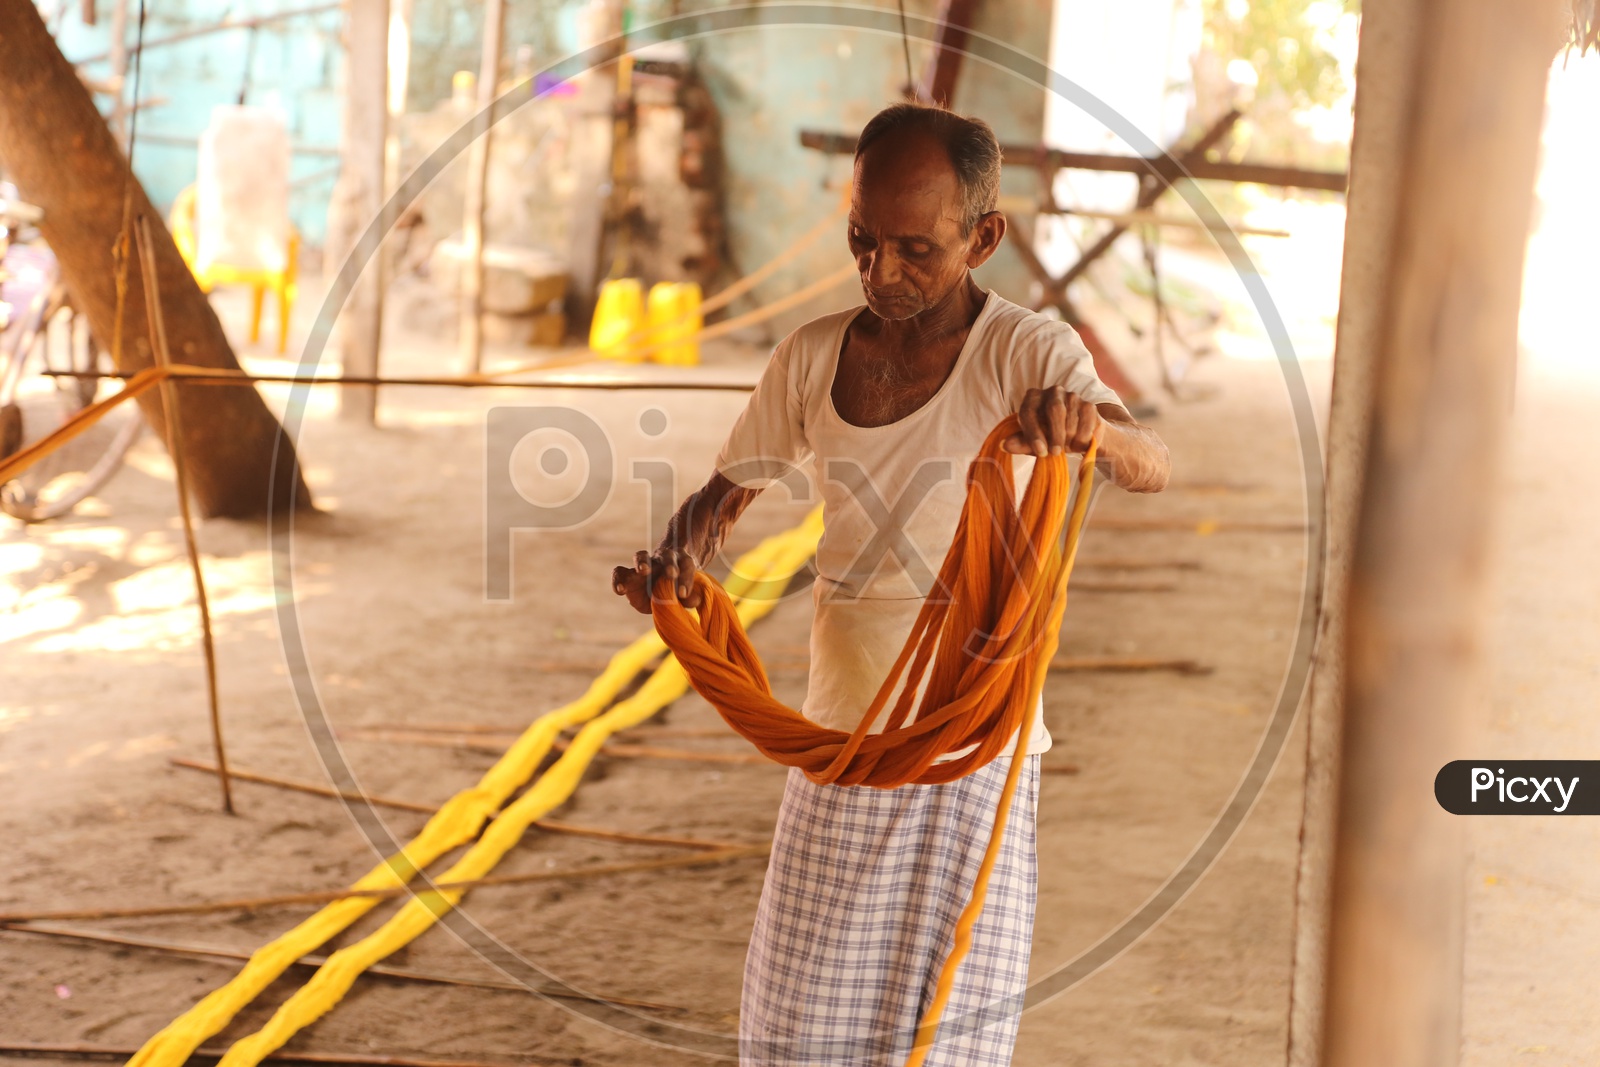 weaver folding threads to make colth